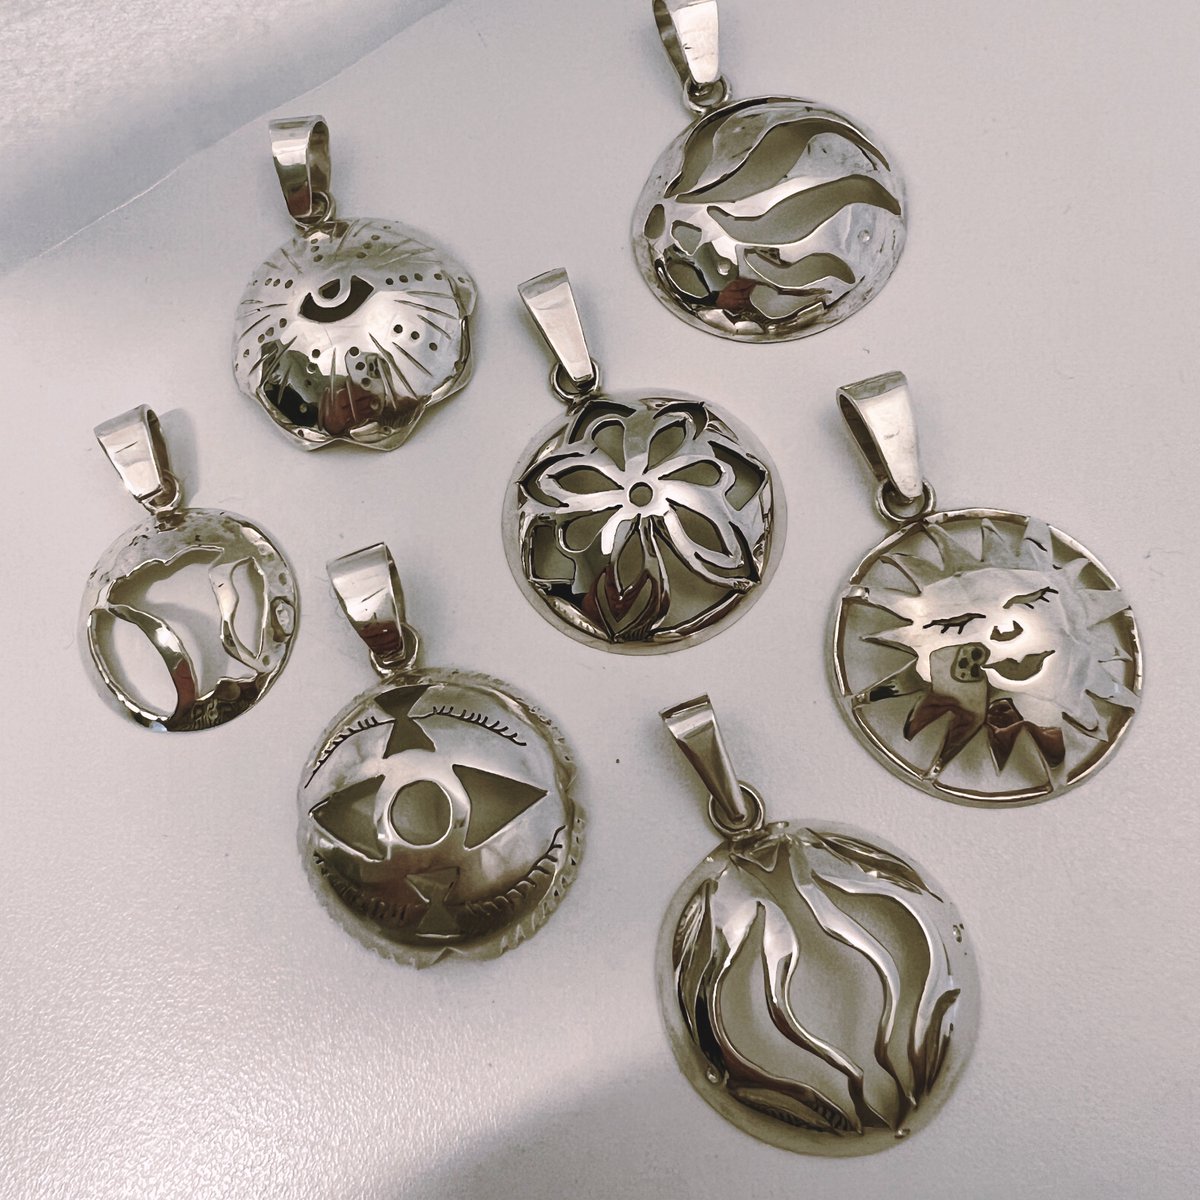 Check out some of our Jewellery Design and Manufacturing diploma students' work from the 'Mandala Project'!

Find out more about this course here: baj.ac.uk/level-3-diplom…

#jewellery #silverjewellery #mandala #mandalas #jewellerymaking #jewellerydesign